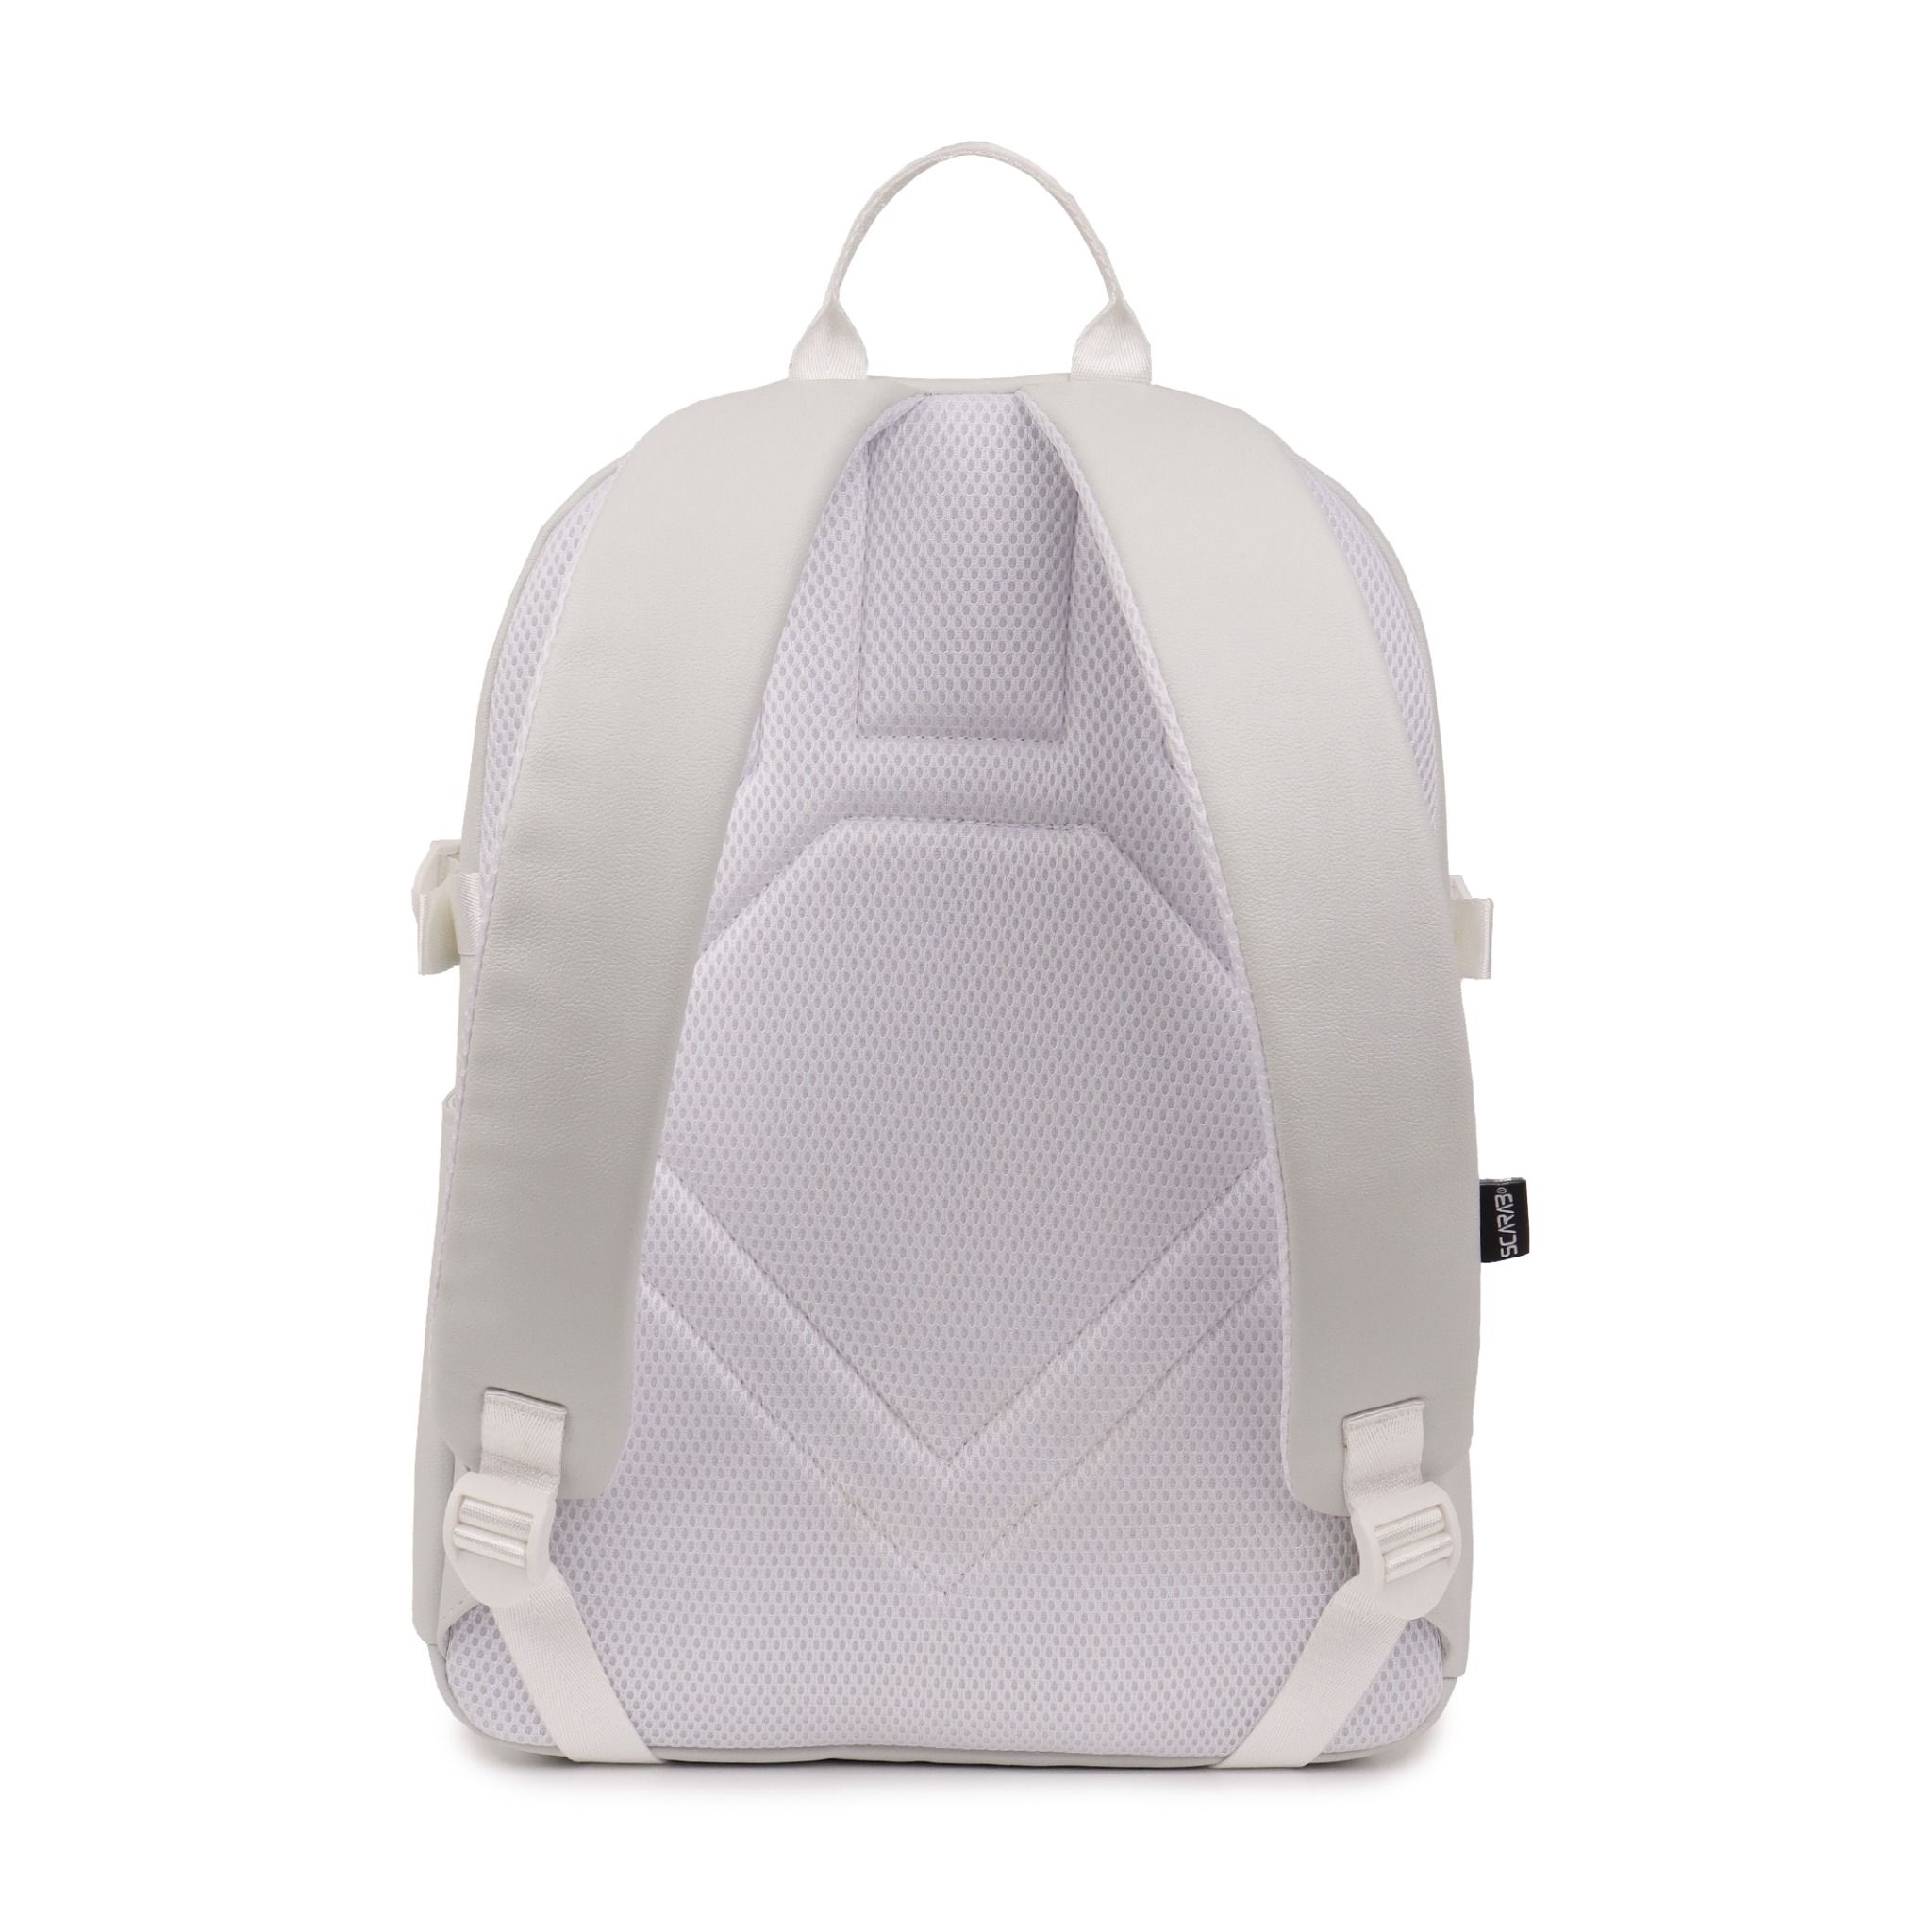  Chapter Backpack - Grey 